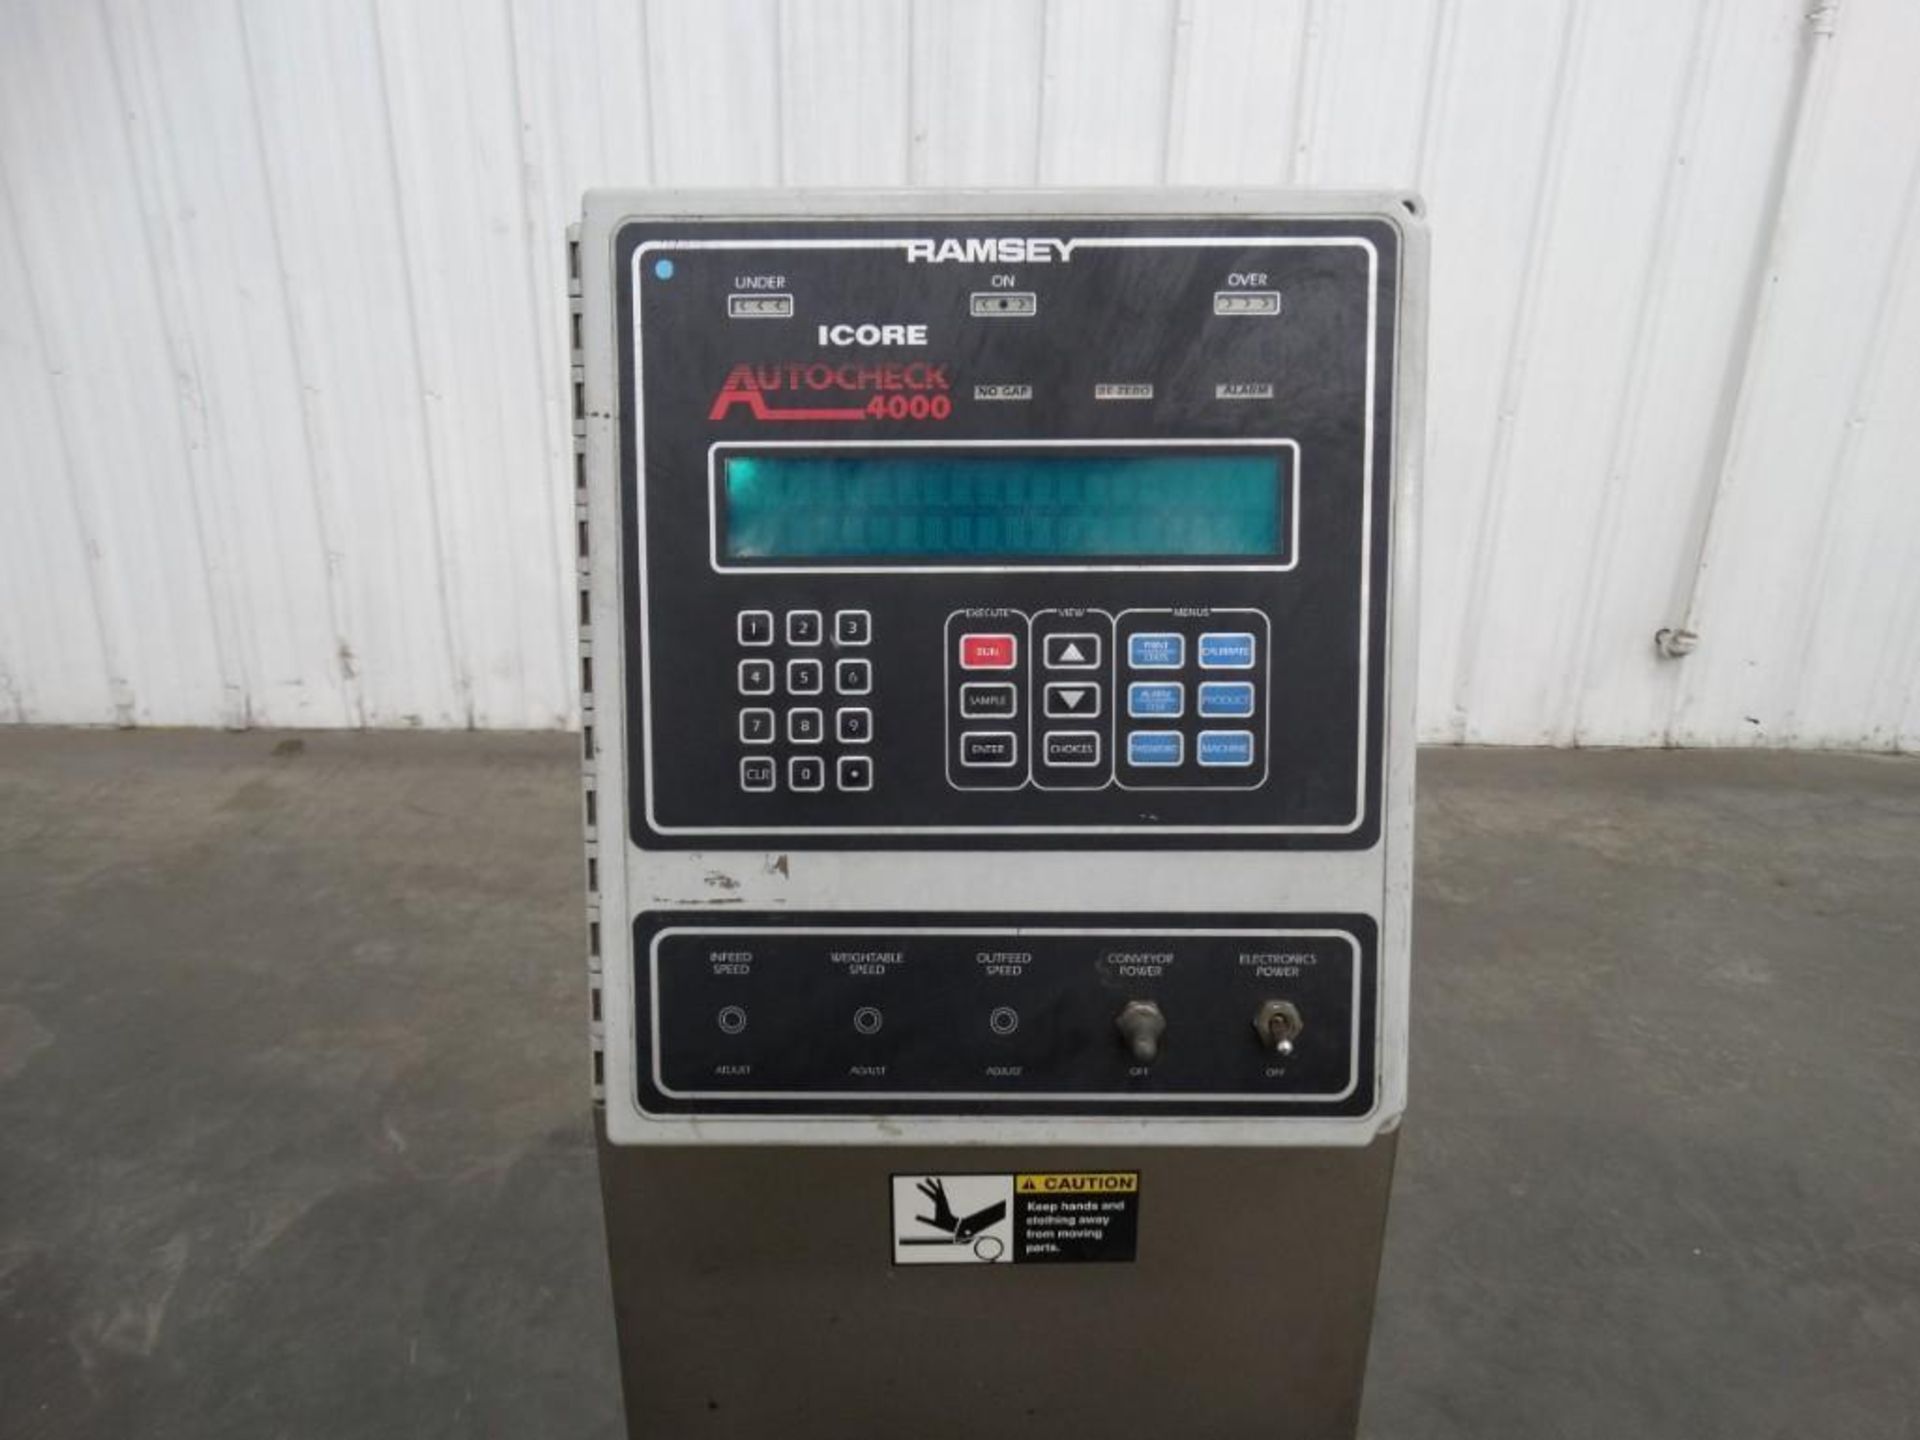 Ramsey Icore AutoCheck 4000 Chain Checkweigher - Image 7 of 15